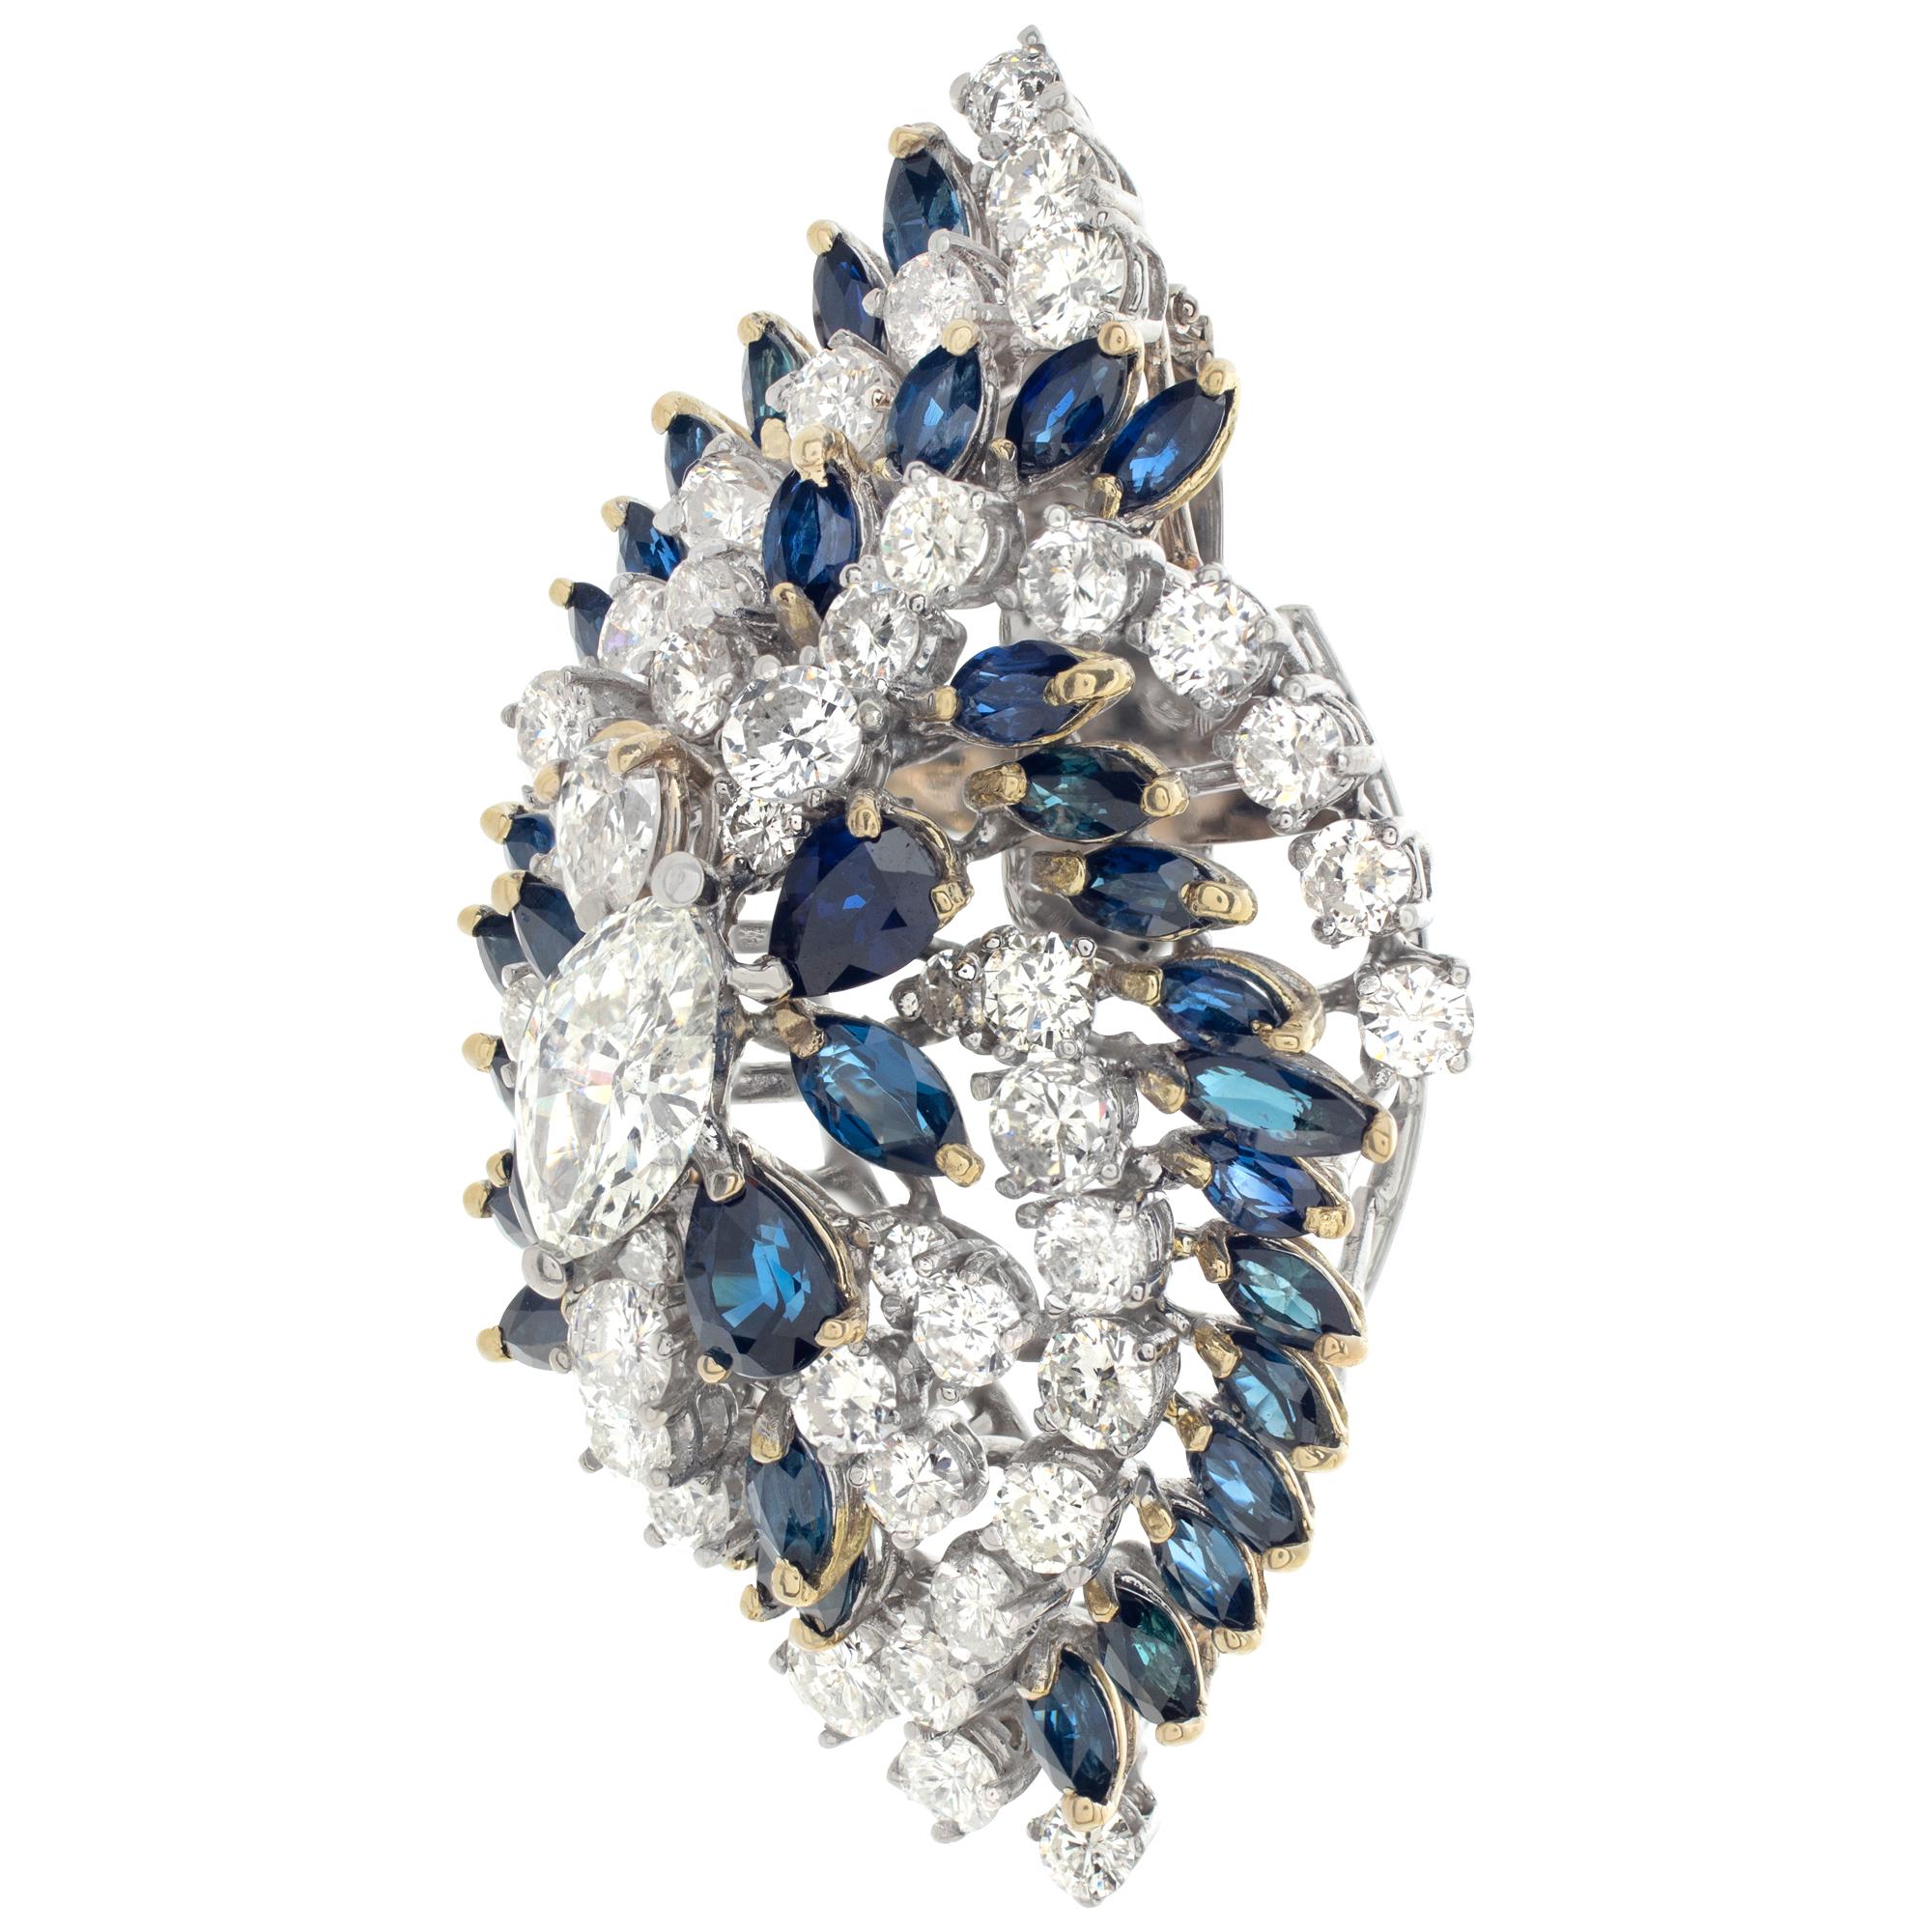 Vintage diamonds and sapphires enhancer, with over 4.50 carats marquise, round and pear brilliant cut diamonds set in 18K white gold, GIA certified center brilliant Marquise cut diamond: 0.91 carat- I color, SI2 clarity, Marquise, pear and round cut